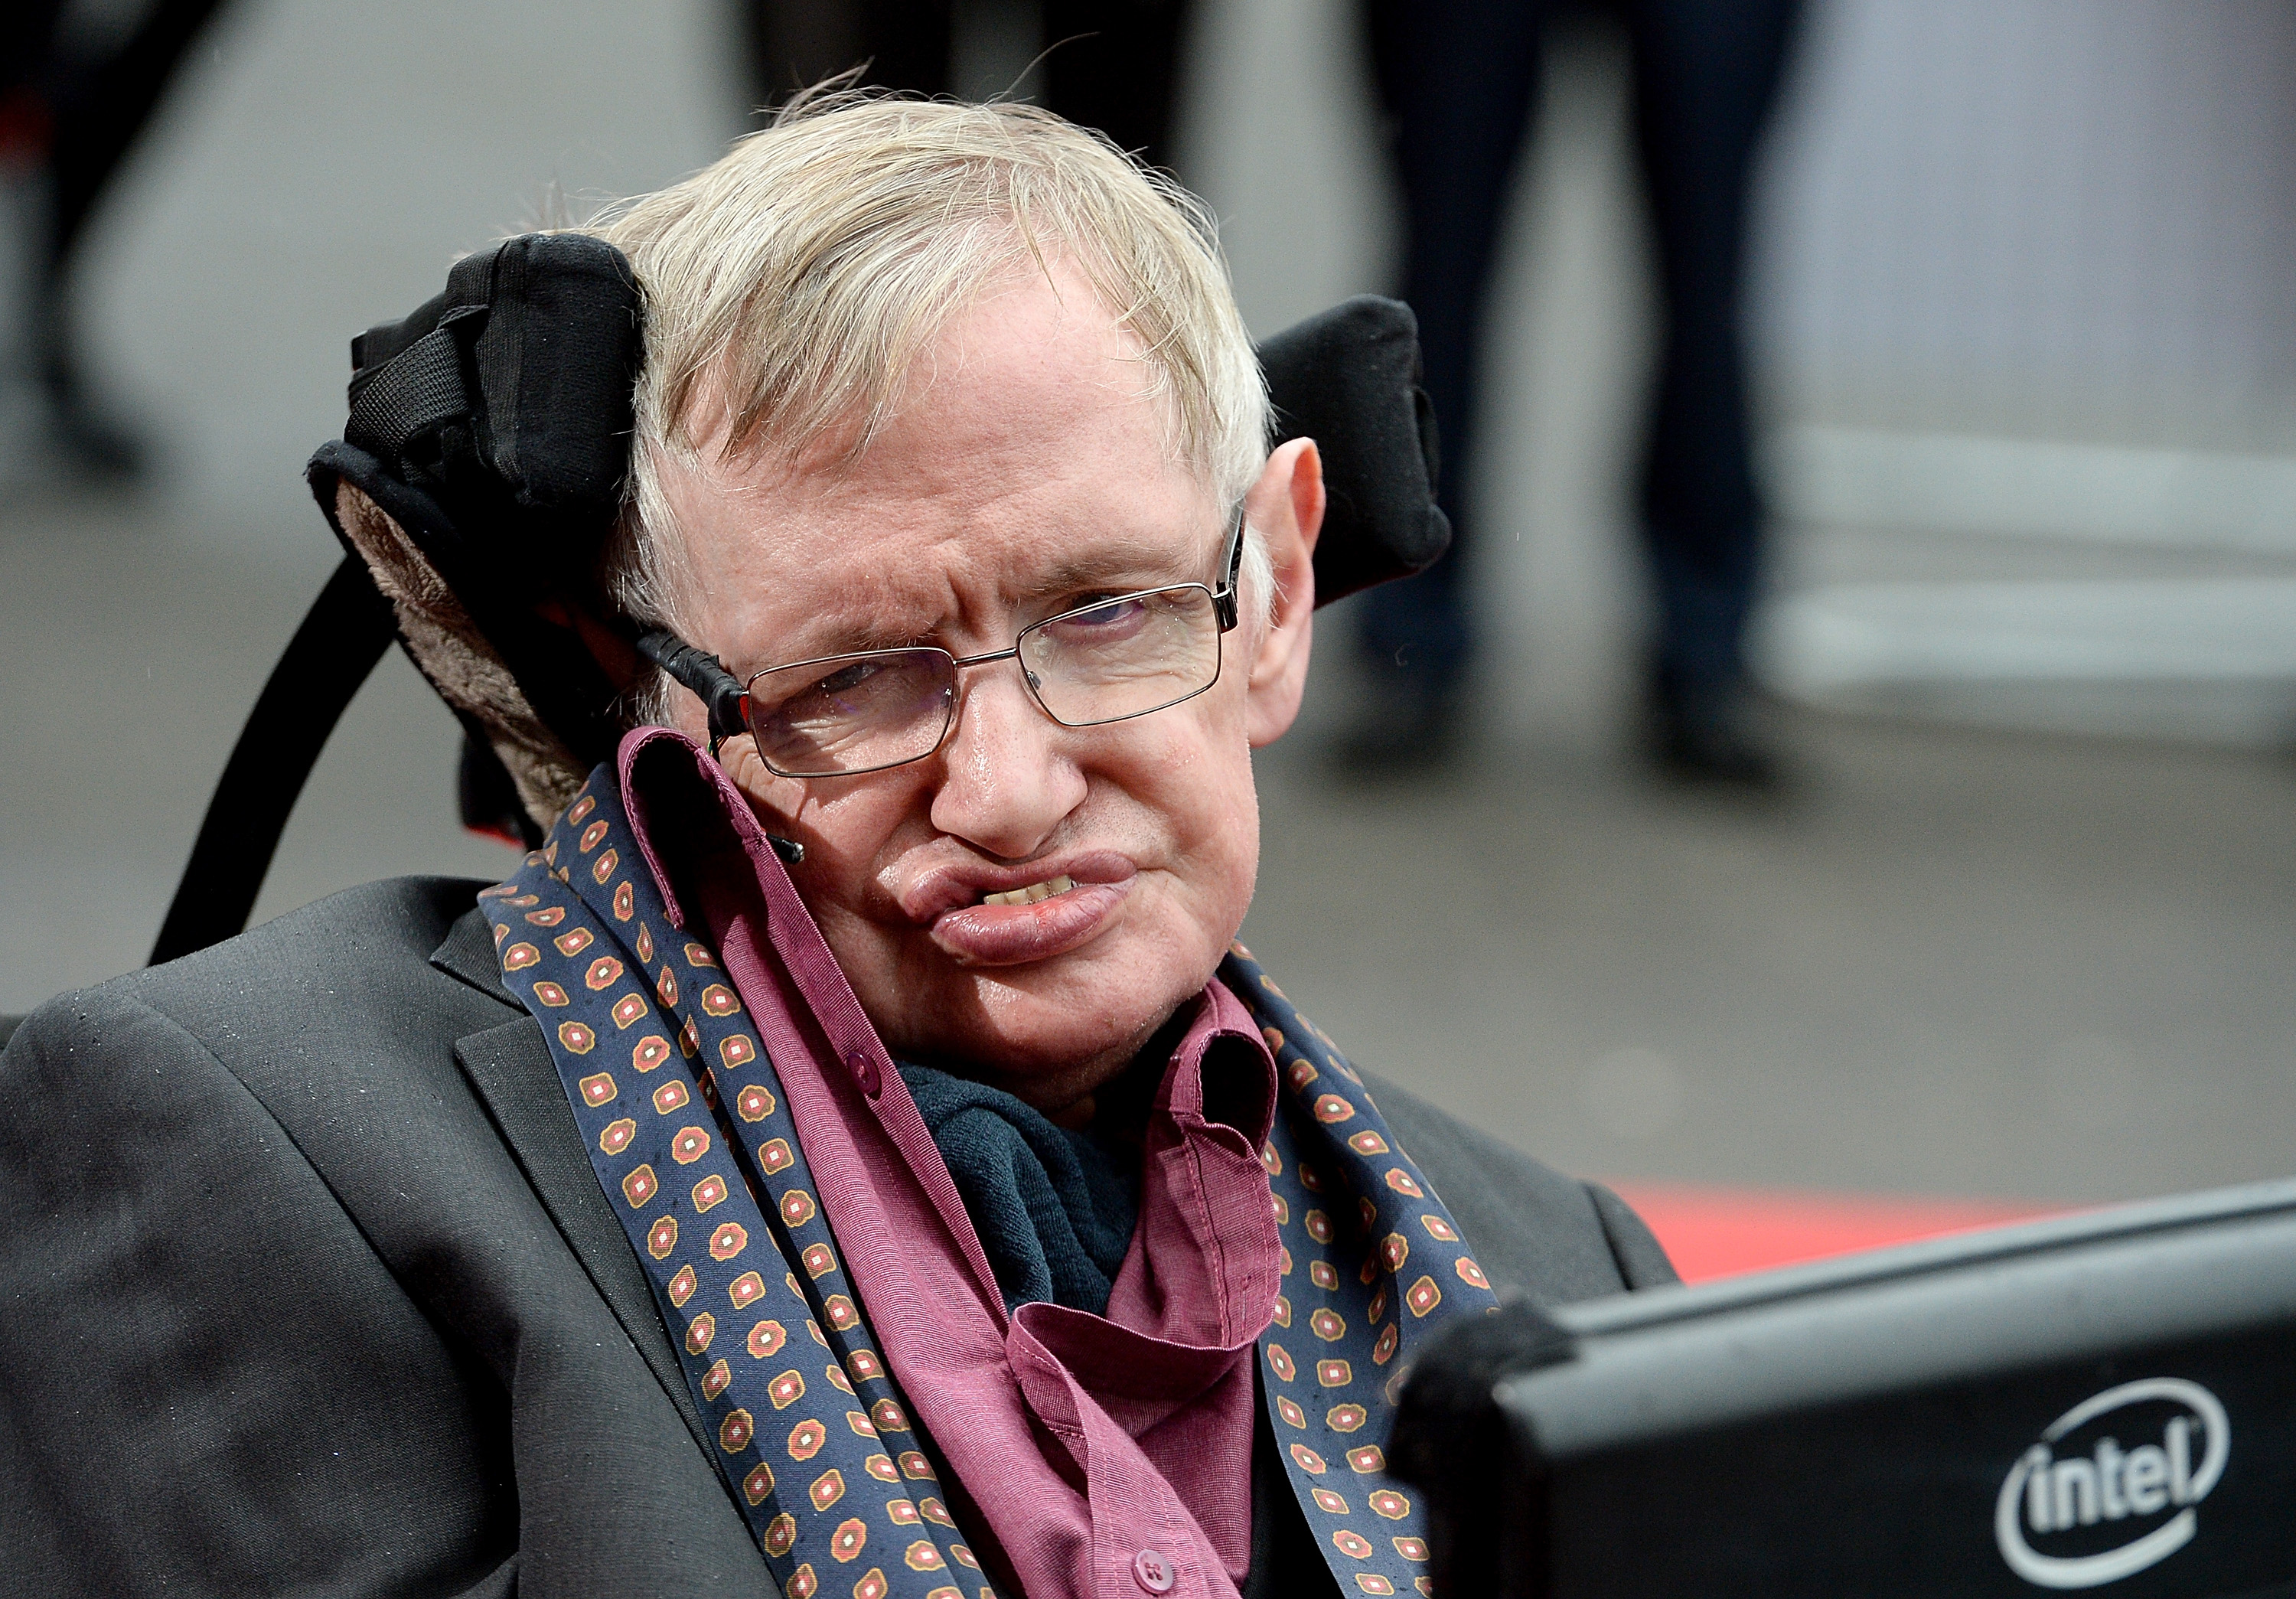 Stephen Hawking  attends "Interstellar Live" at Royal Albert Hall on March 30, 2015 in London, England. (Dave J Hogan—Getty Images)